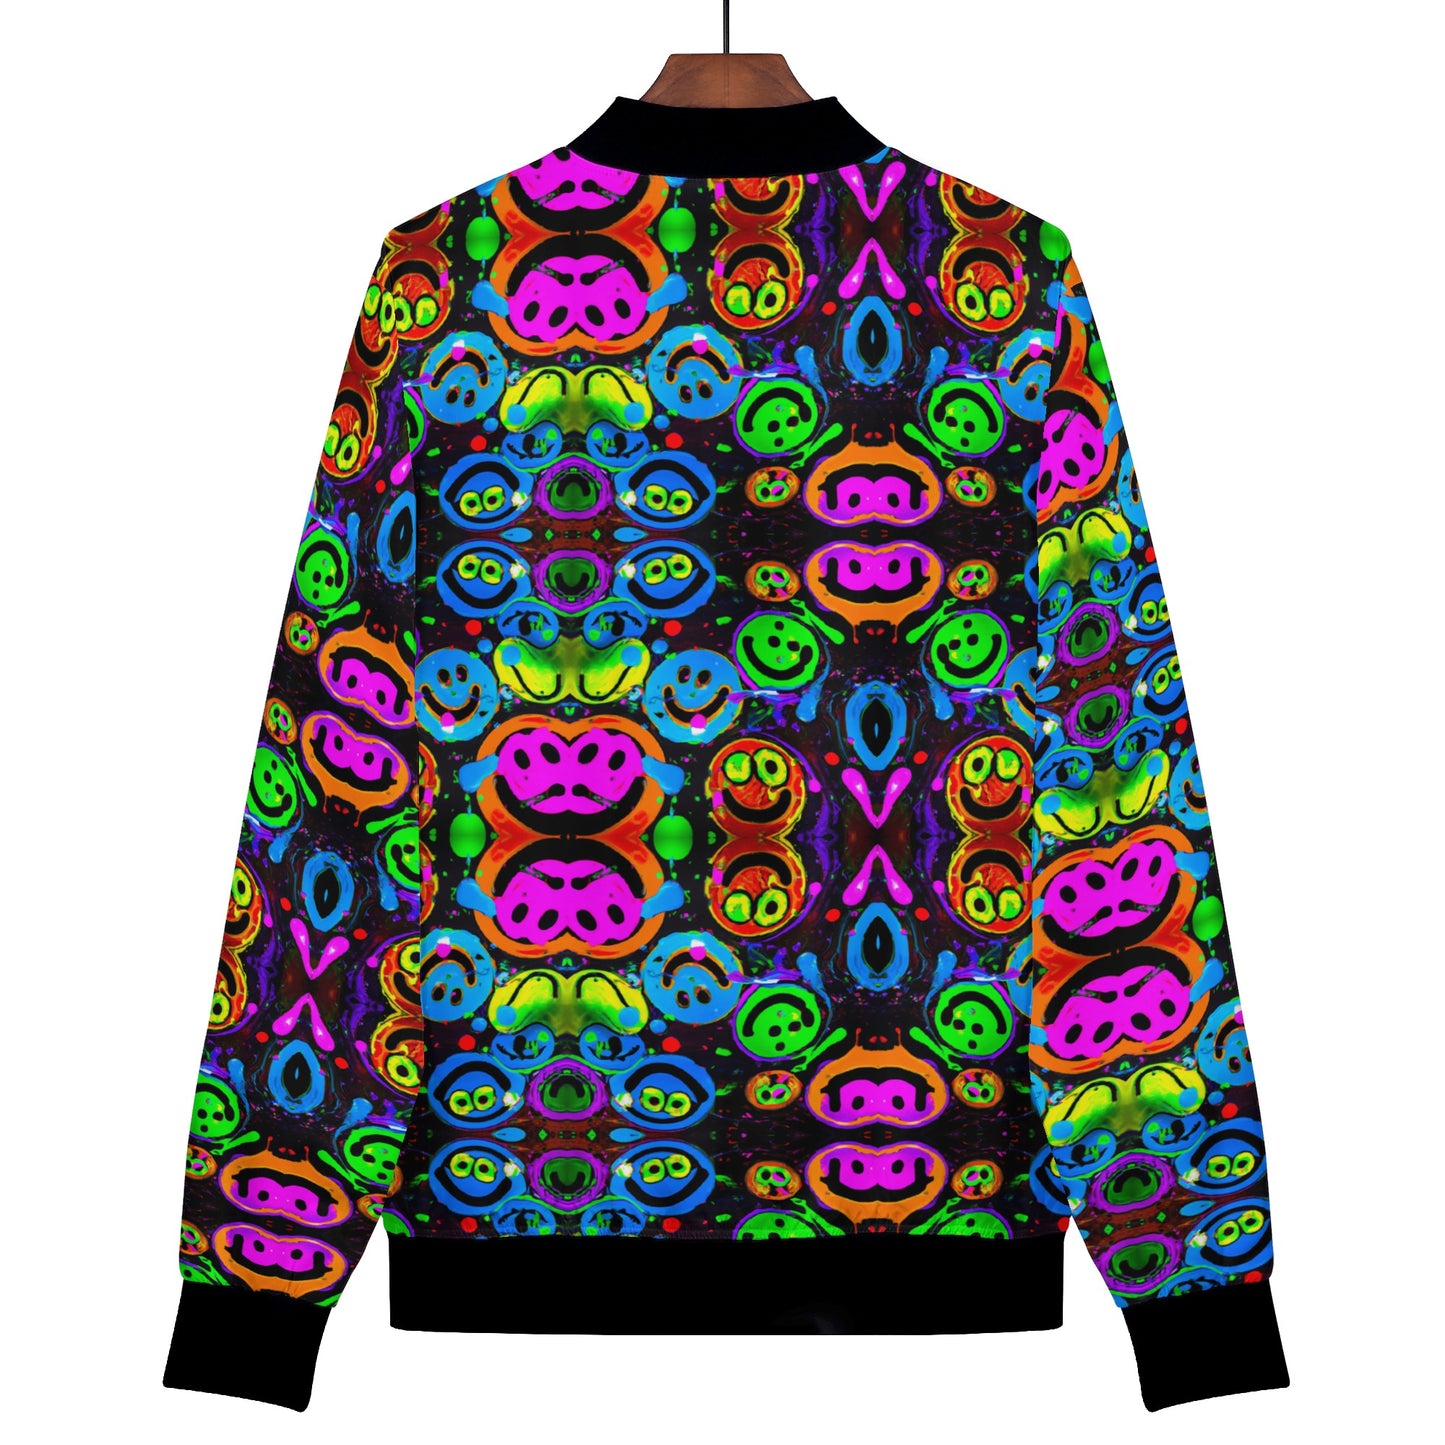 The acid-melted smiley faces create a vibrant and unique style that is sure to turn heads. Made with attention to detail, this custom printed jacket is crafted for quality and comfort. Whether you're going for a casual look or dressing up for a night out, this jacket ensures that you stand out in any crowd. Embrace your individuality and show off your bold fashion sense with the Neon Acid Smile Women's Bomber Jacket.The acid-melted smiley faces create a vibrant and unique style that is sure to turn